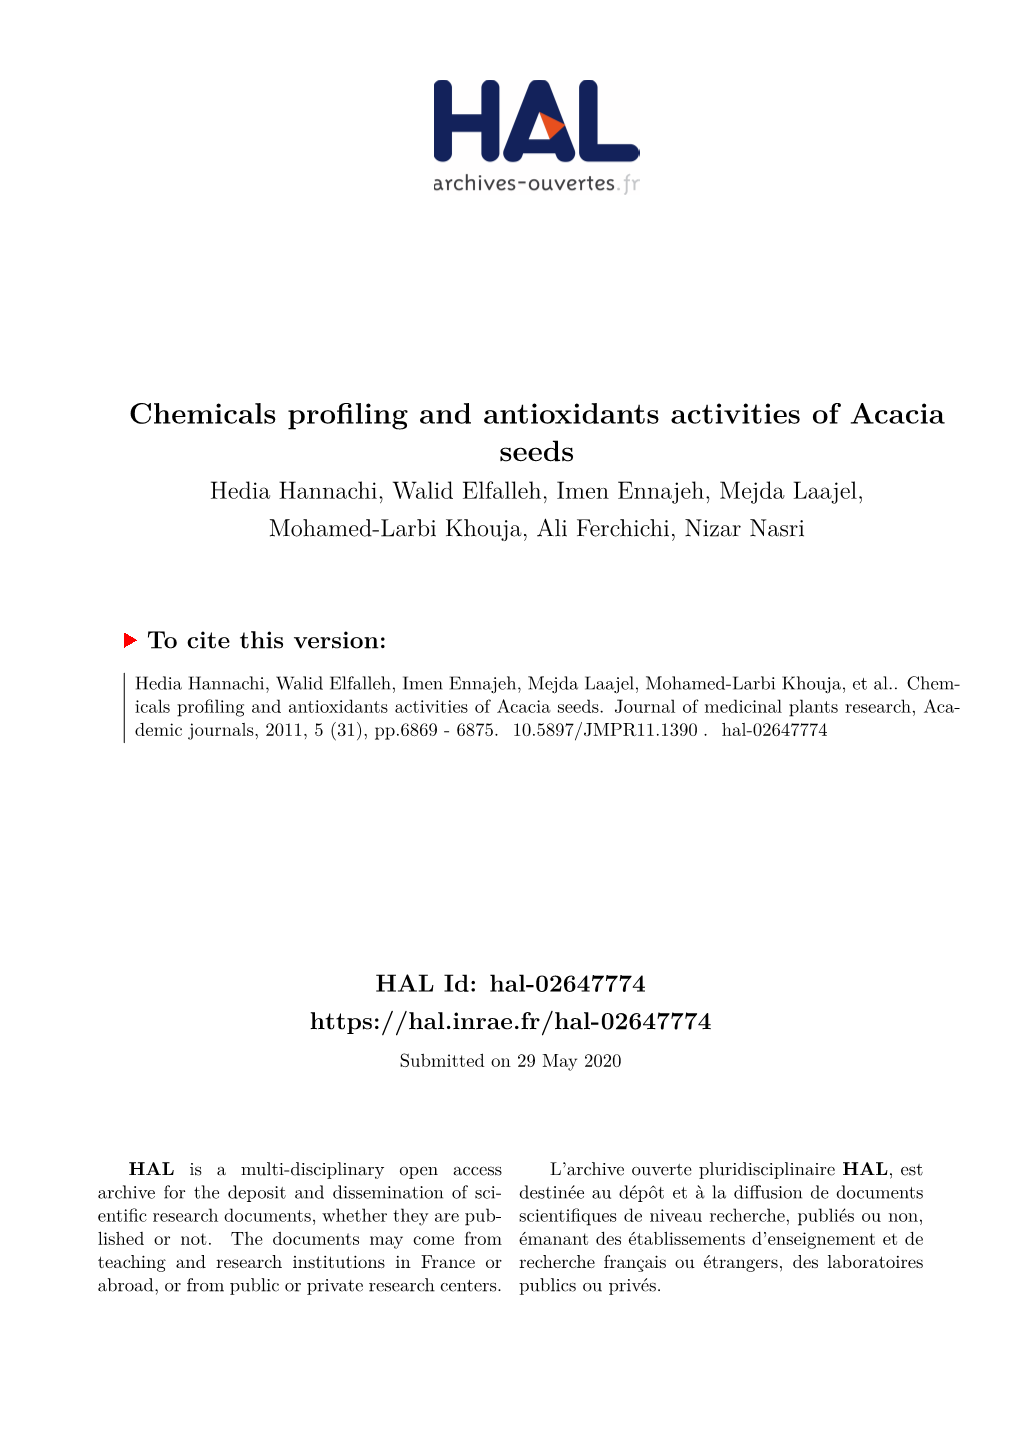 Chemicals Profiling and Antioxidants Activities of Acacia Seeds